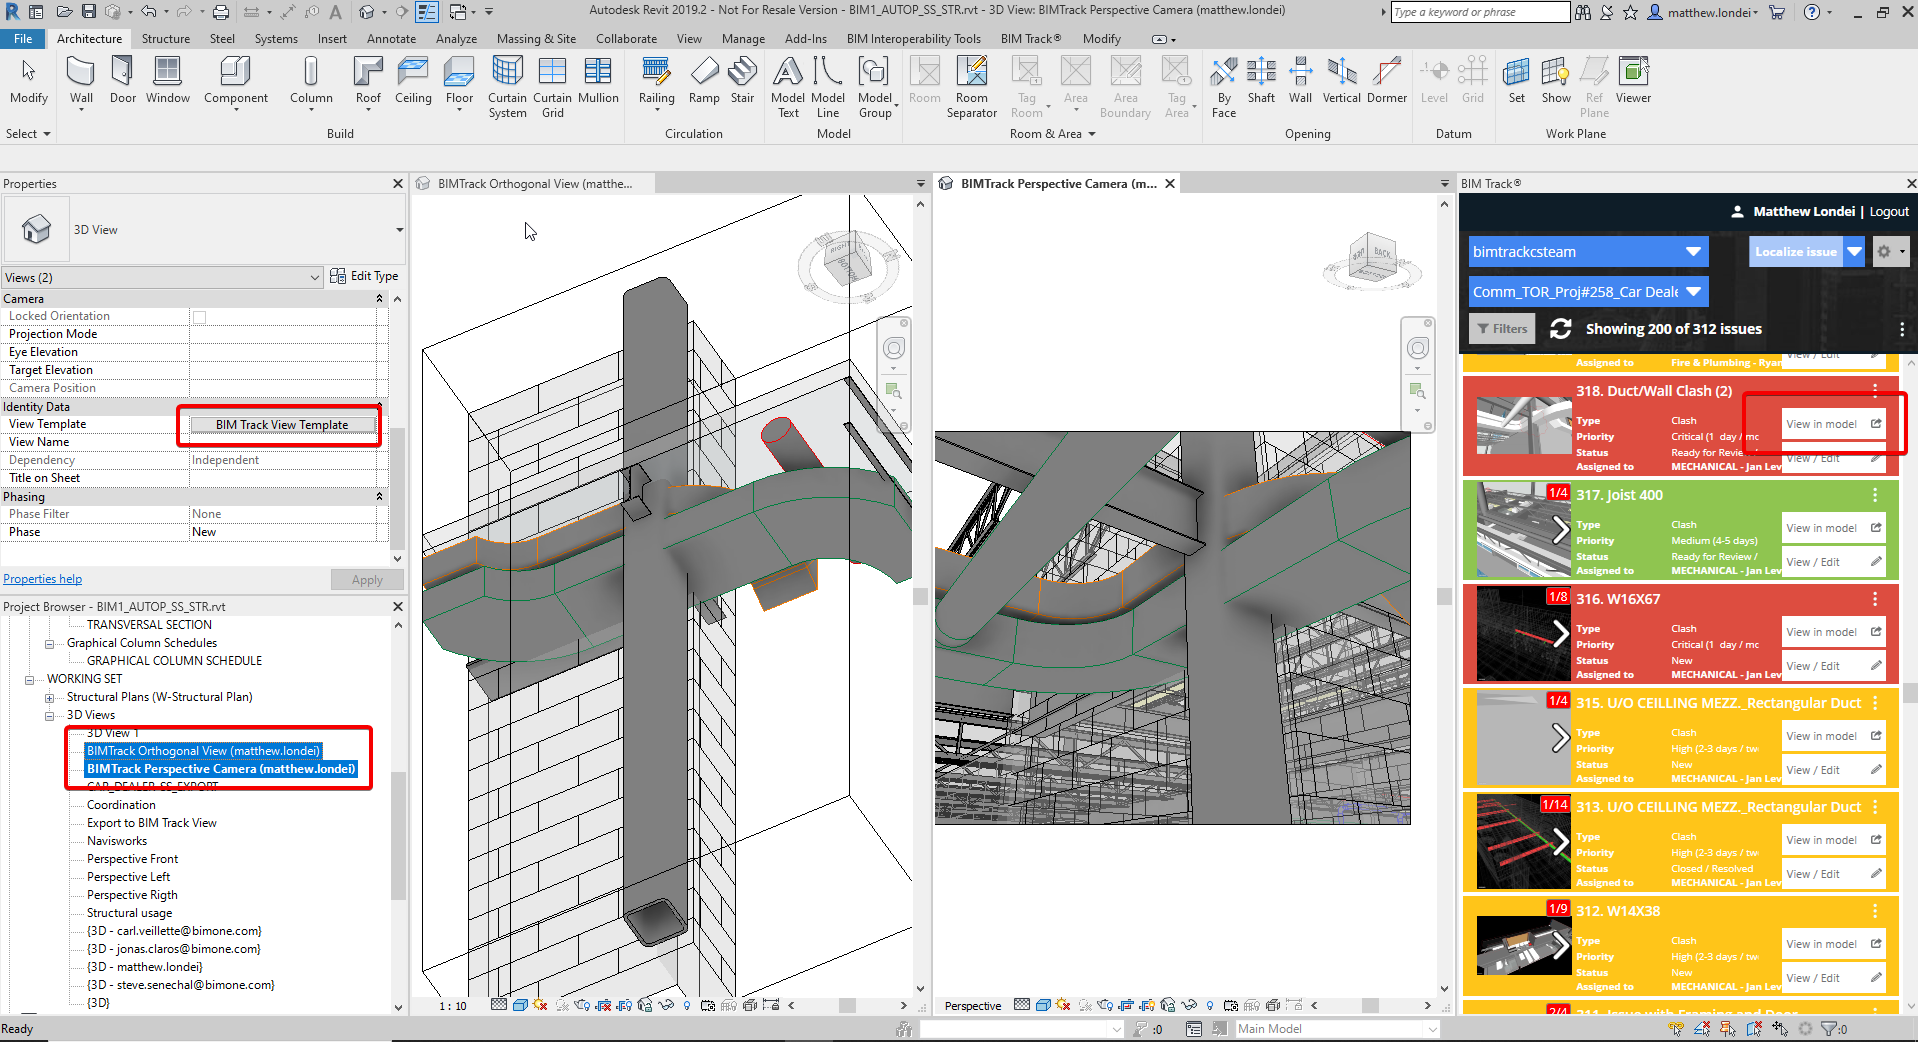 Some of the different possible view types in Revit for BIM Track issues.